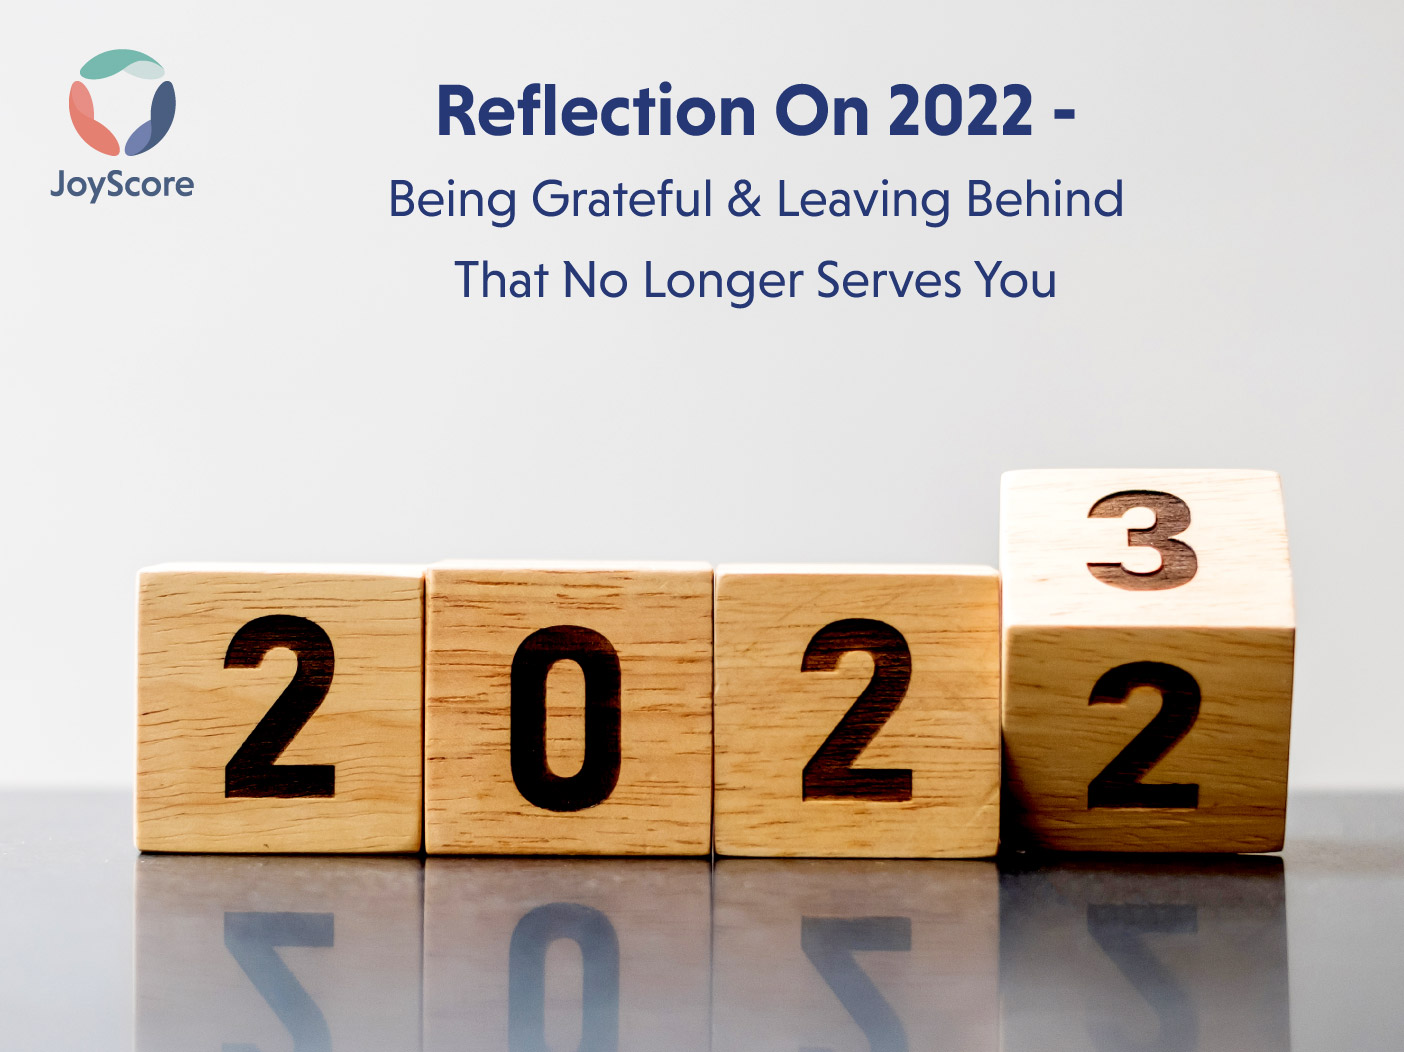 Reflecting on 2022- Being Grateful for the Things That Were And Leaving Behind What No Longer Serves You